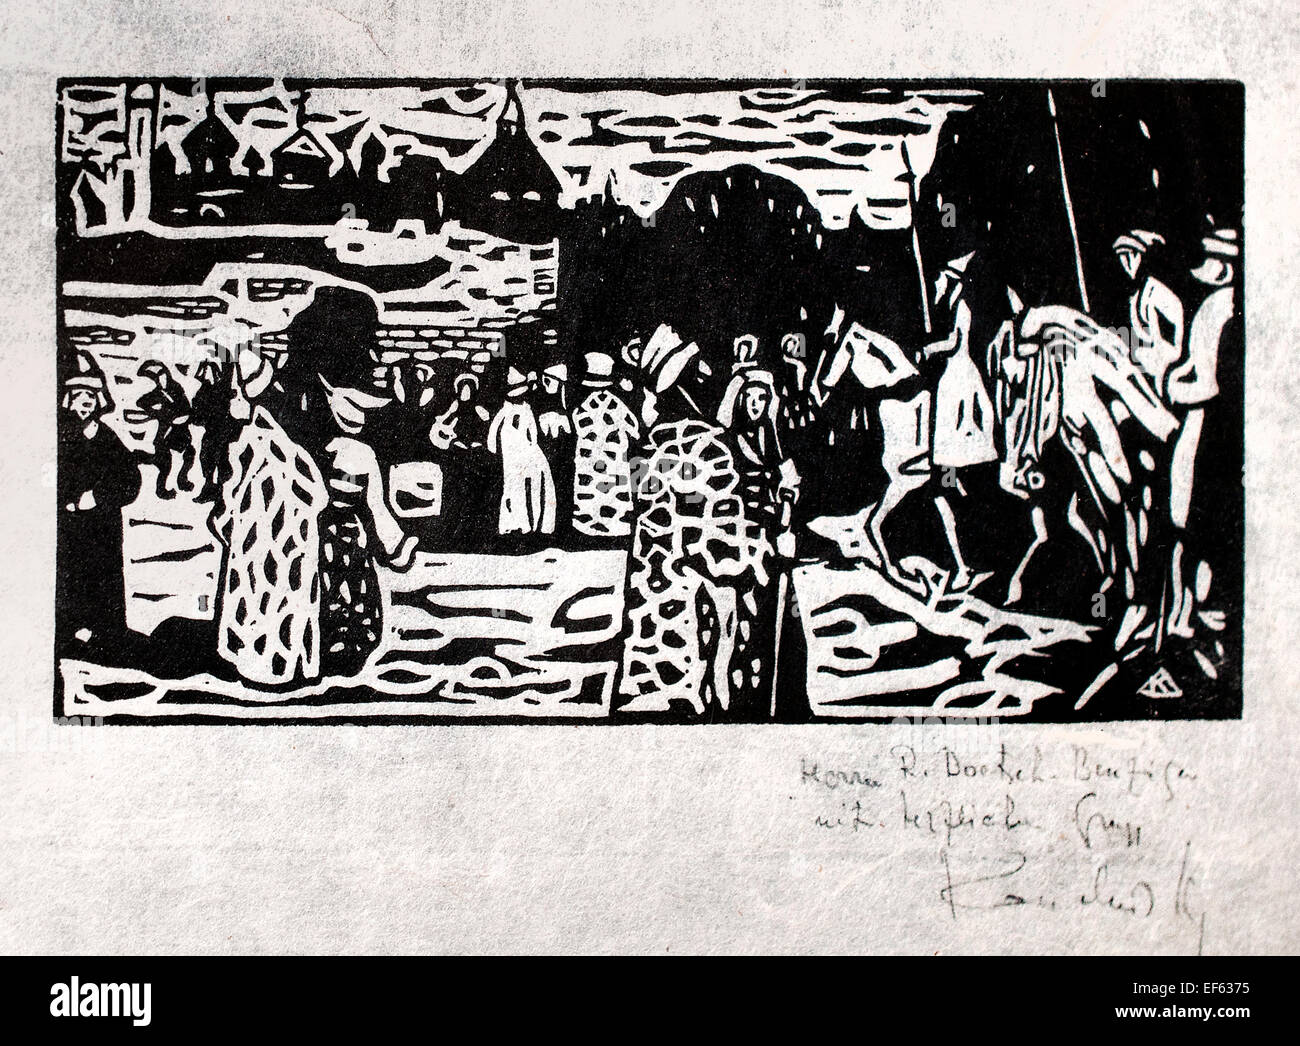 Sonntag-Altrussisch - Sunday Old Russian 1904 Wassily Kandinsky 1866-1944 Russian Russia ( Vatican Collection of Modern Religious Art Rome Italy ) Woodcut on paper Stock Photo